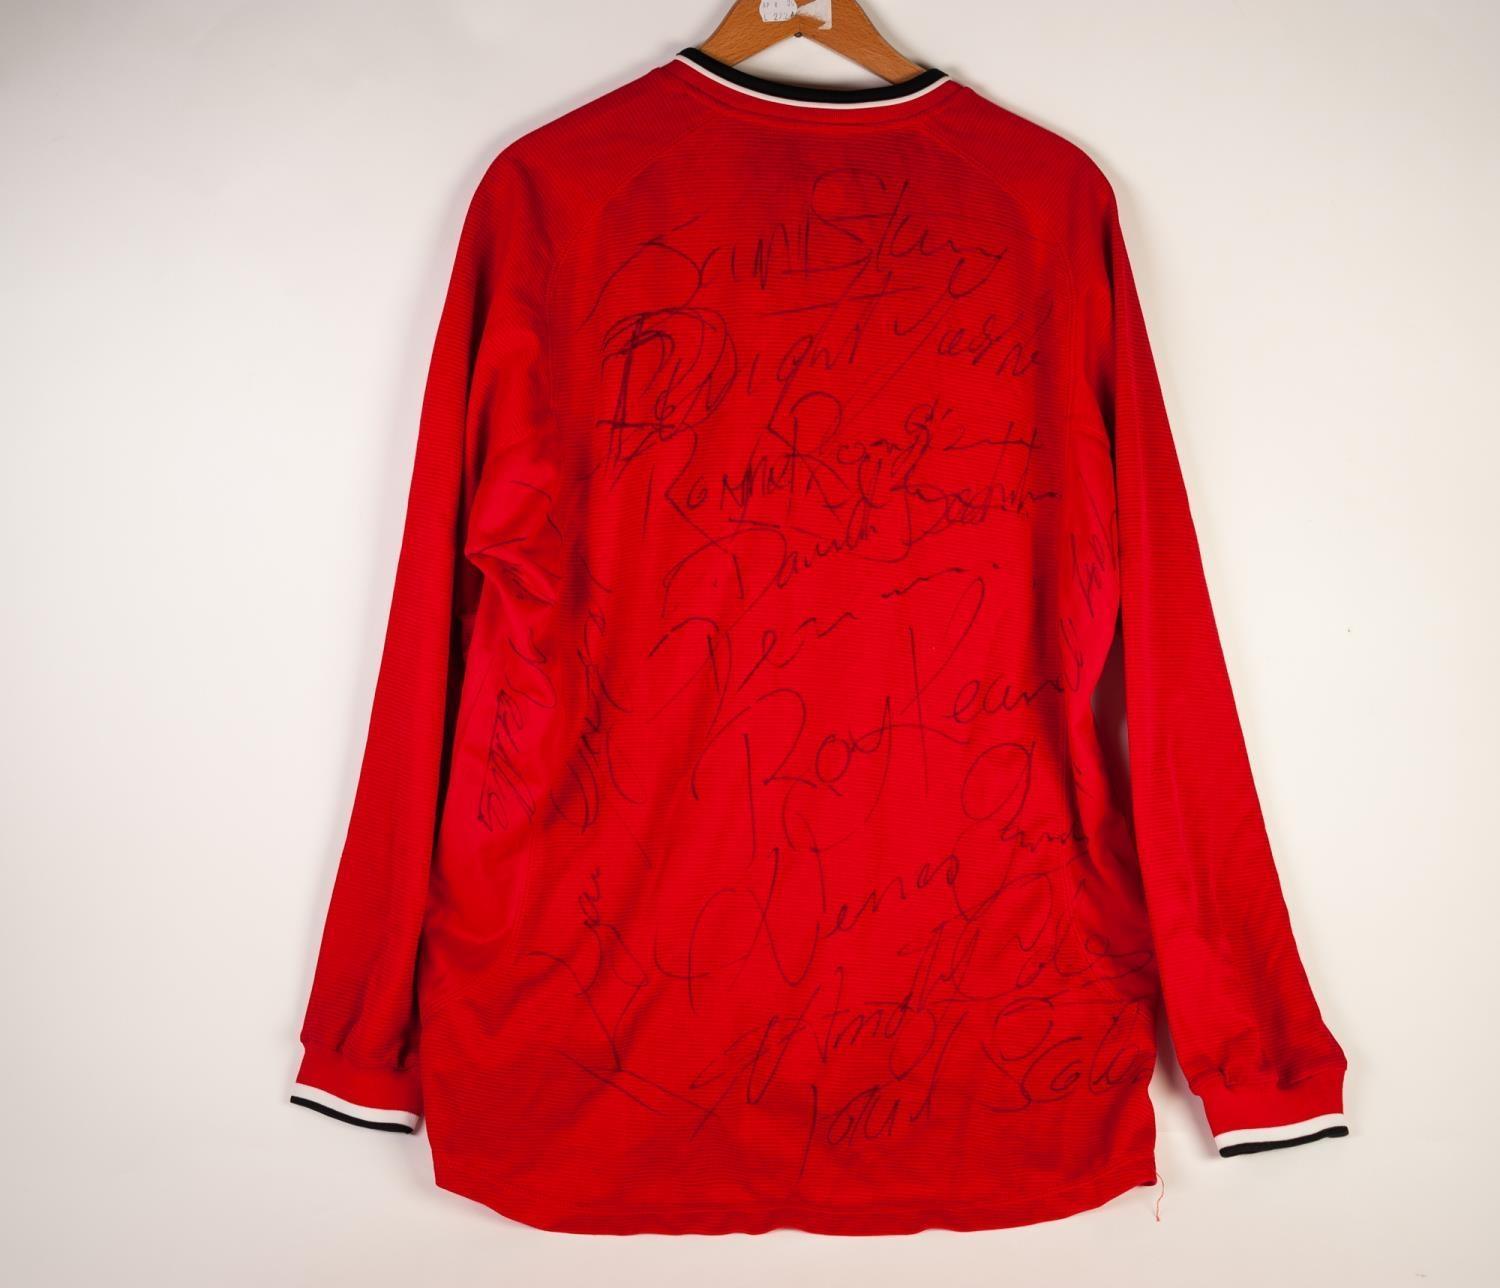 MANCHESTER UNITED 'VODAFONE' SPONSORED REPLICA RED UMBRO SHIRT signed by Roy Keane and Rud van - Image 2 of 3